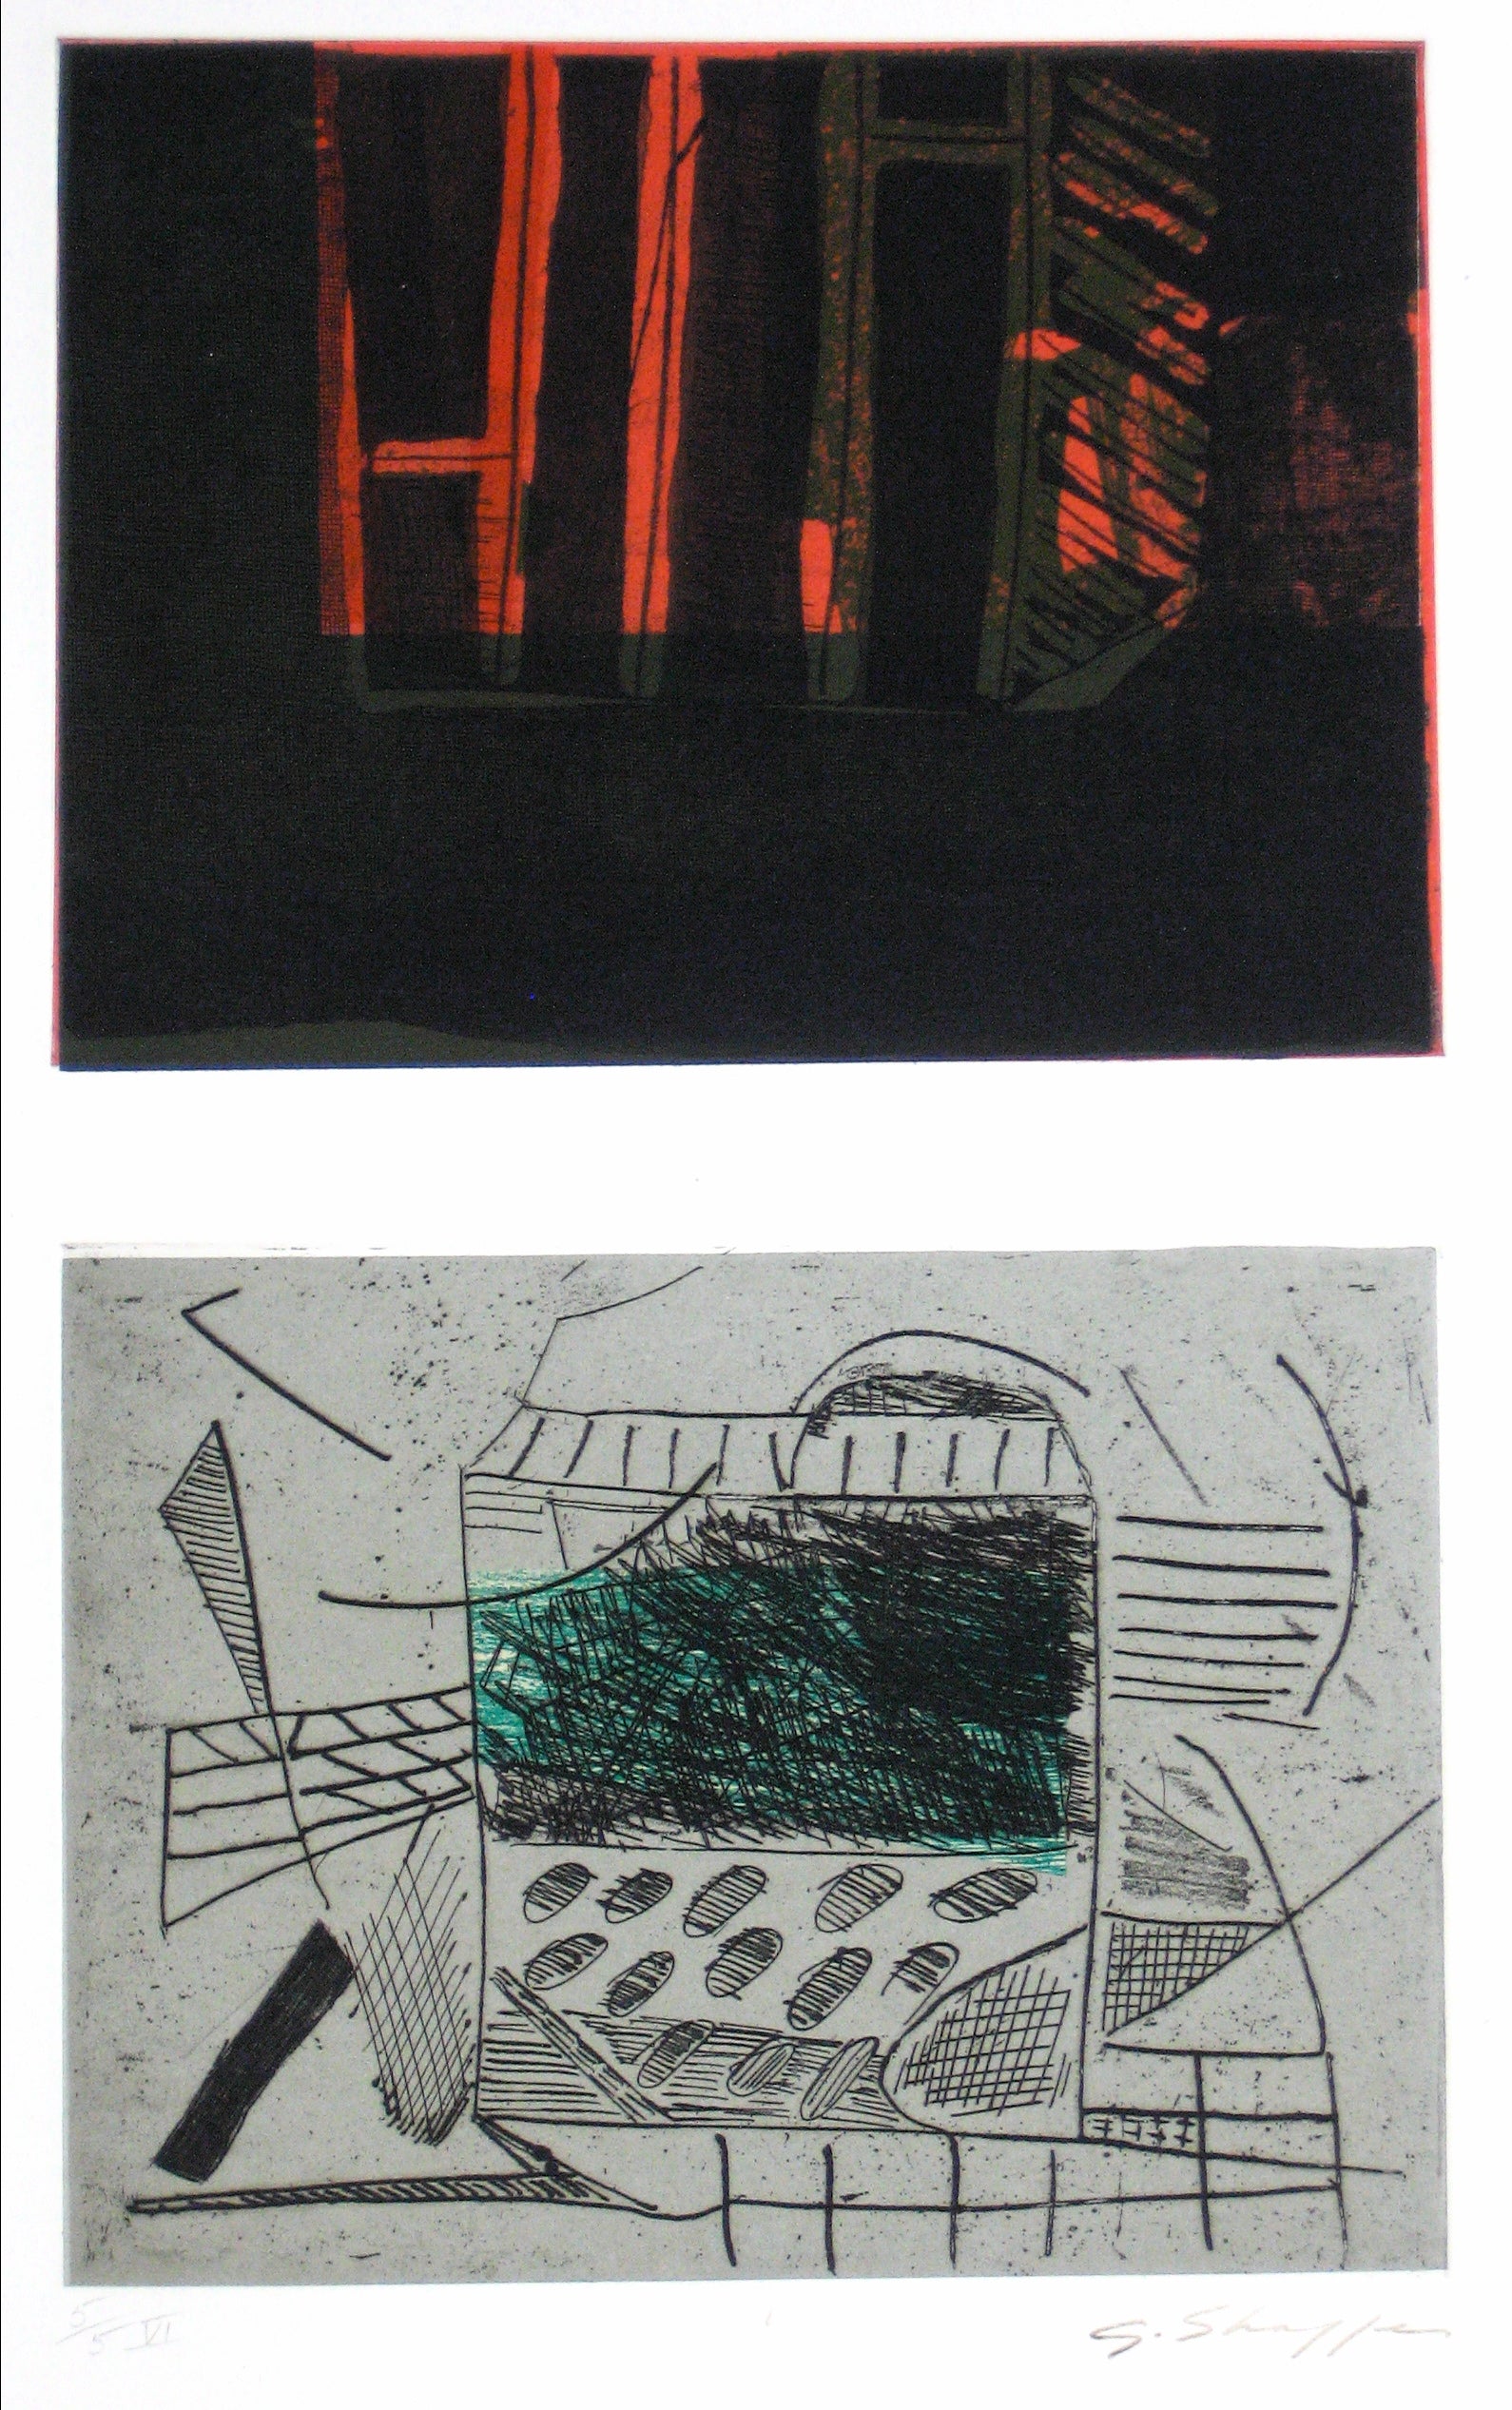 Abstracted Duel Image <br>1989 Litho & Chine Colle <br><br>#11778